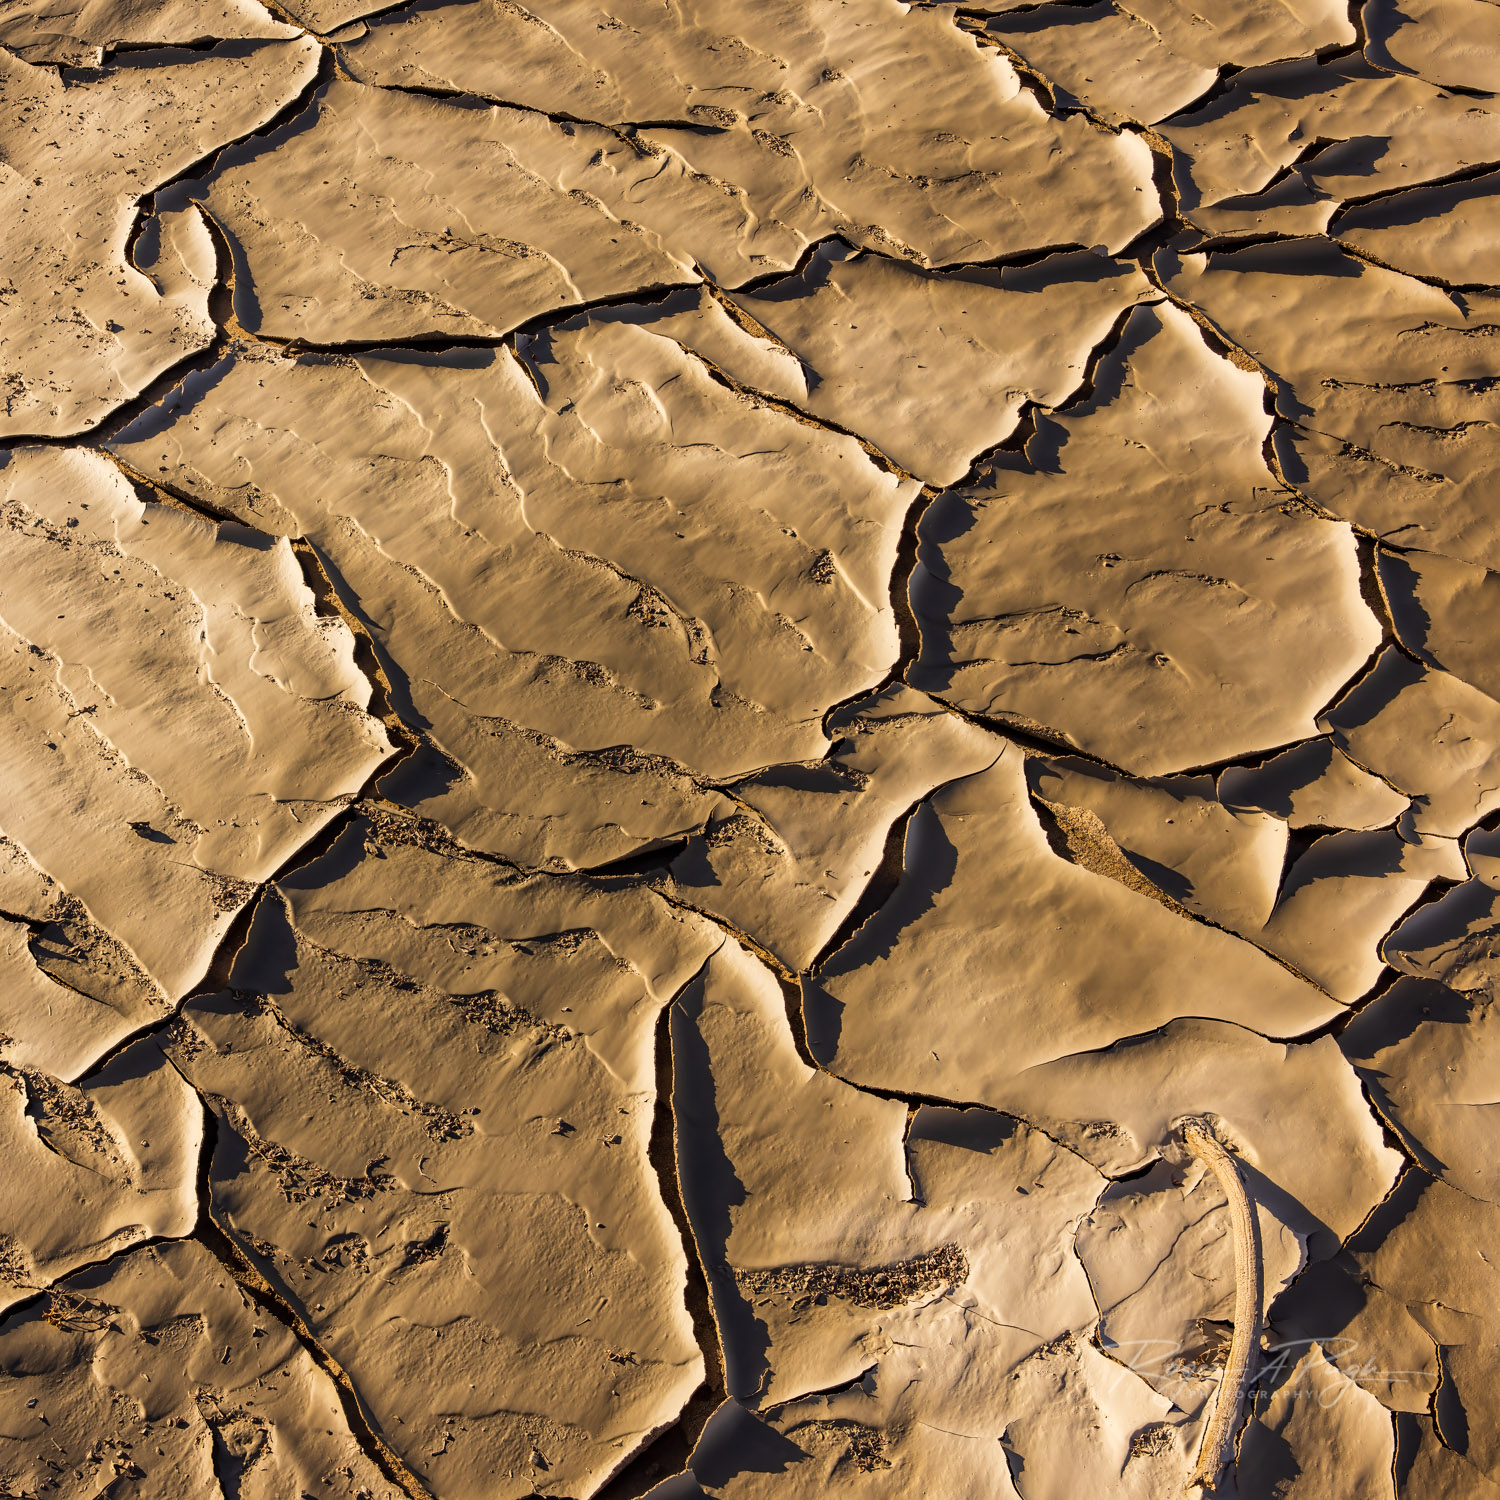 The process of wet sand drying in the hot sun makes for some great textures on the desert floor.